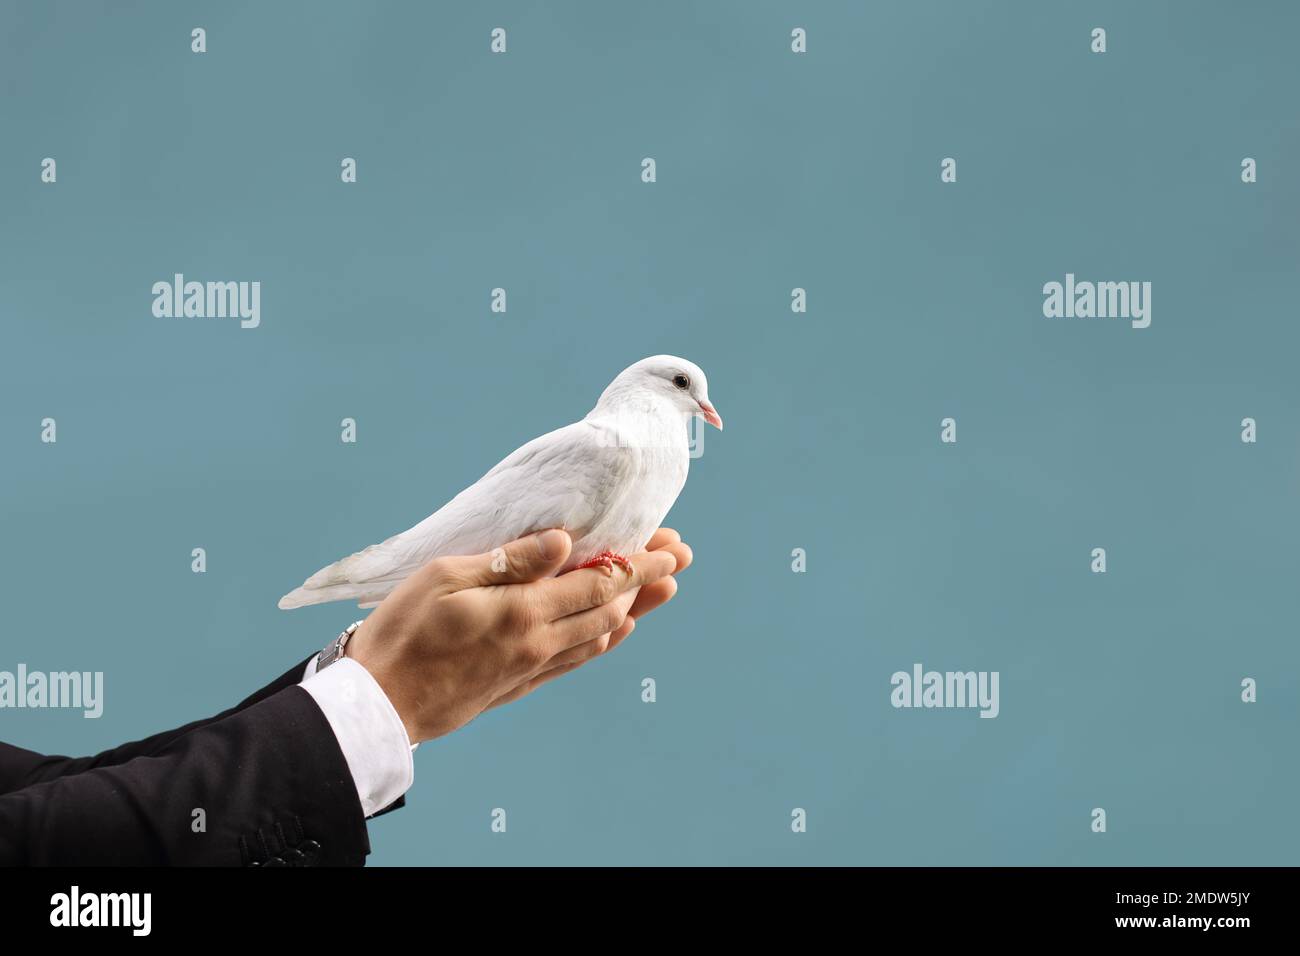 Male hand holding a white dove isolated on blue background Stock Photo